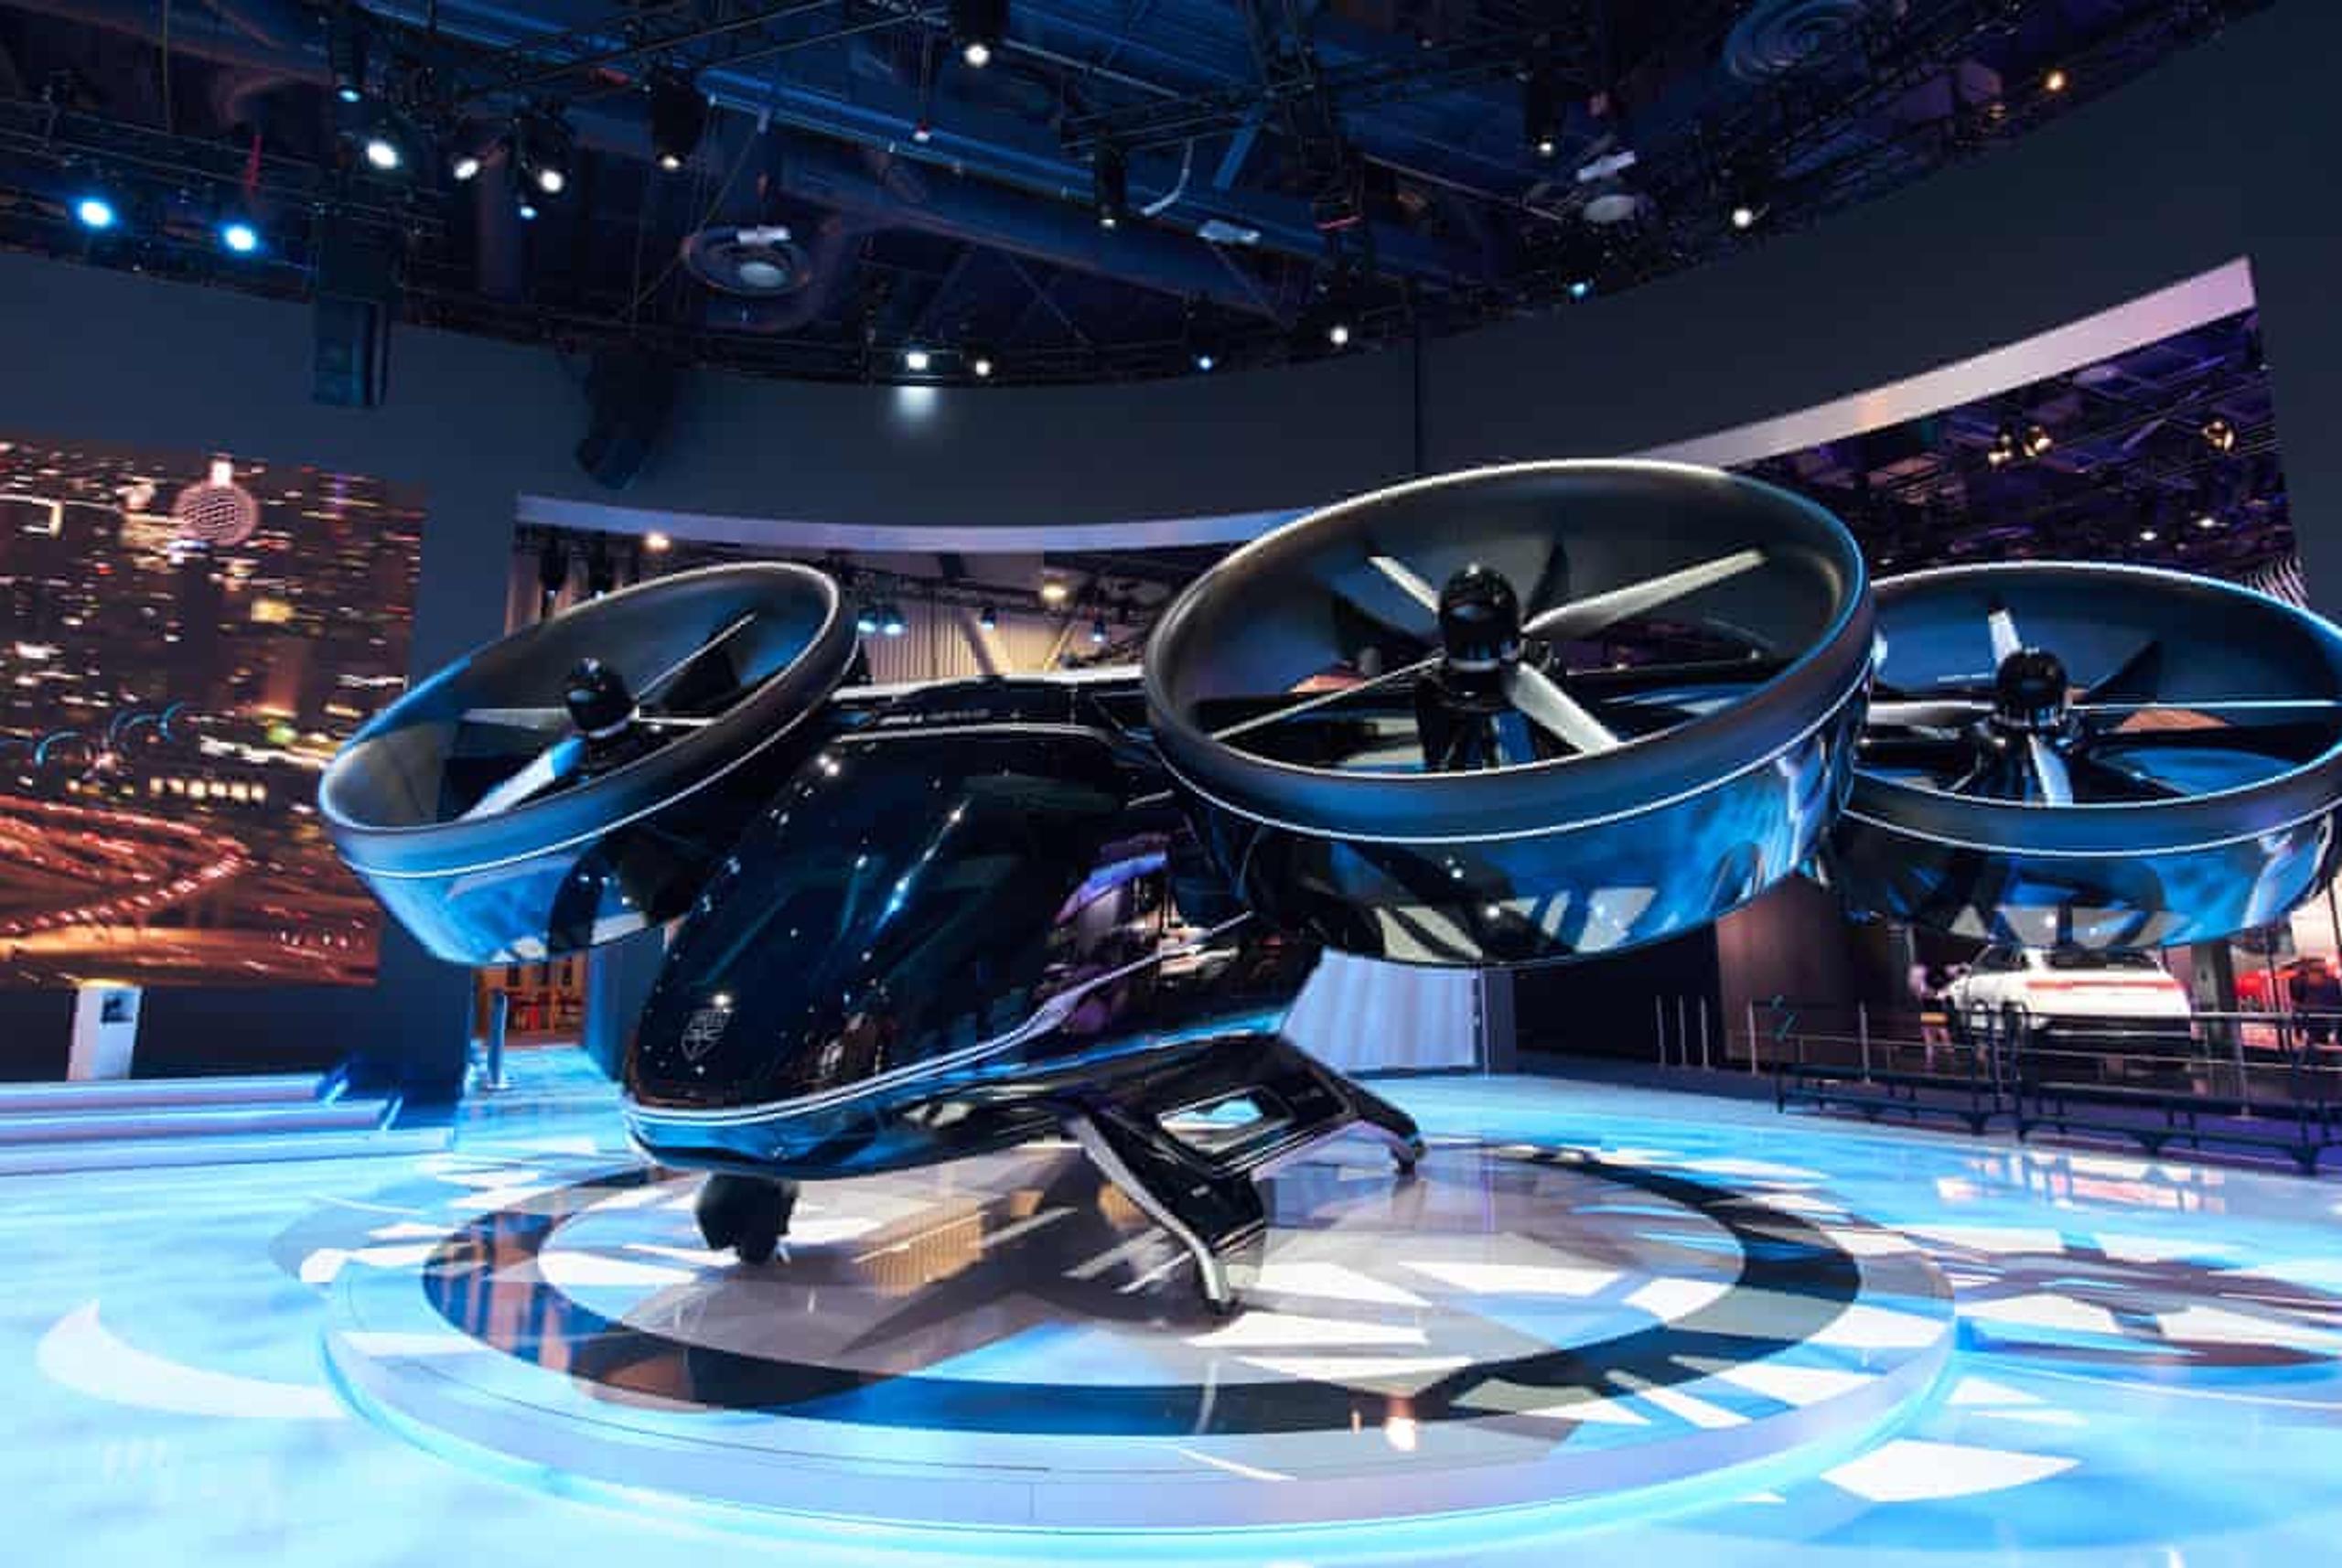 air-taxi concept model by Uber